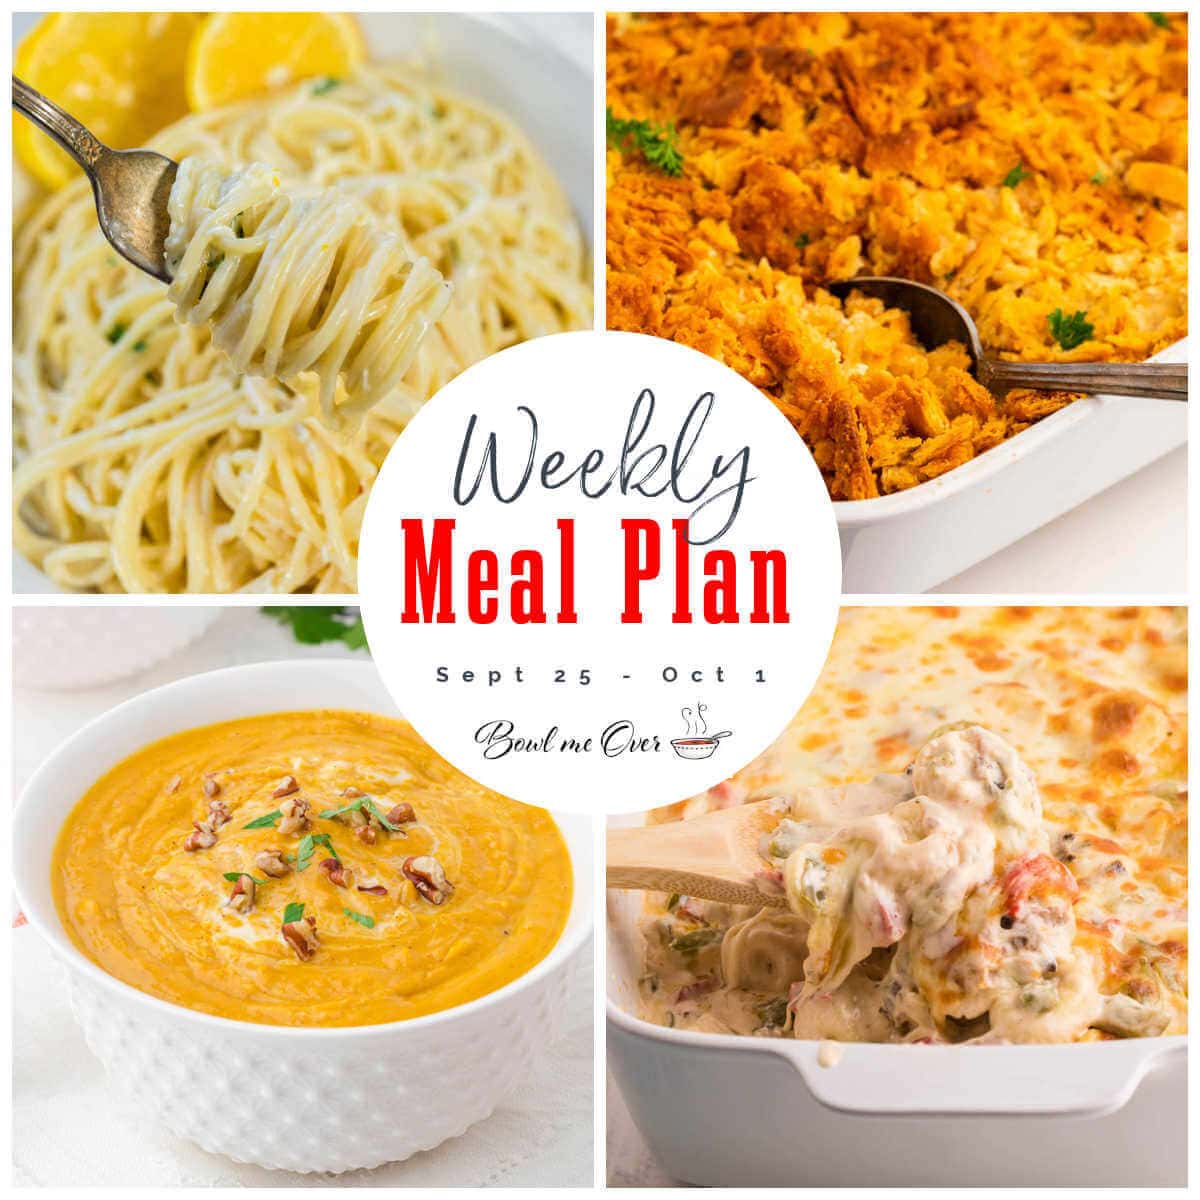 Weekly Meal Plan 39 with collage of photos and print overlay. 